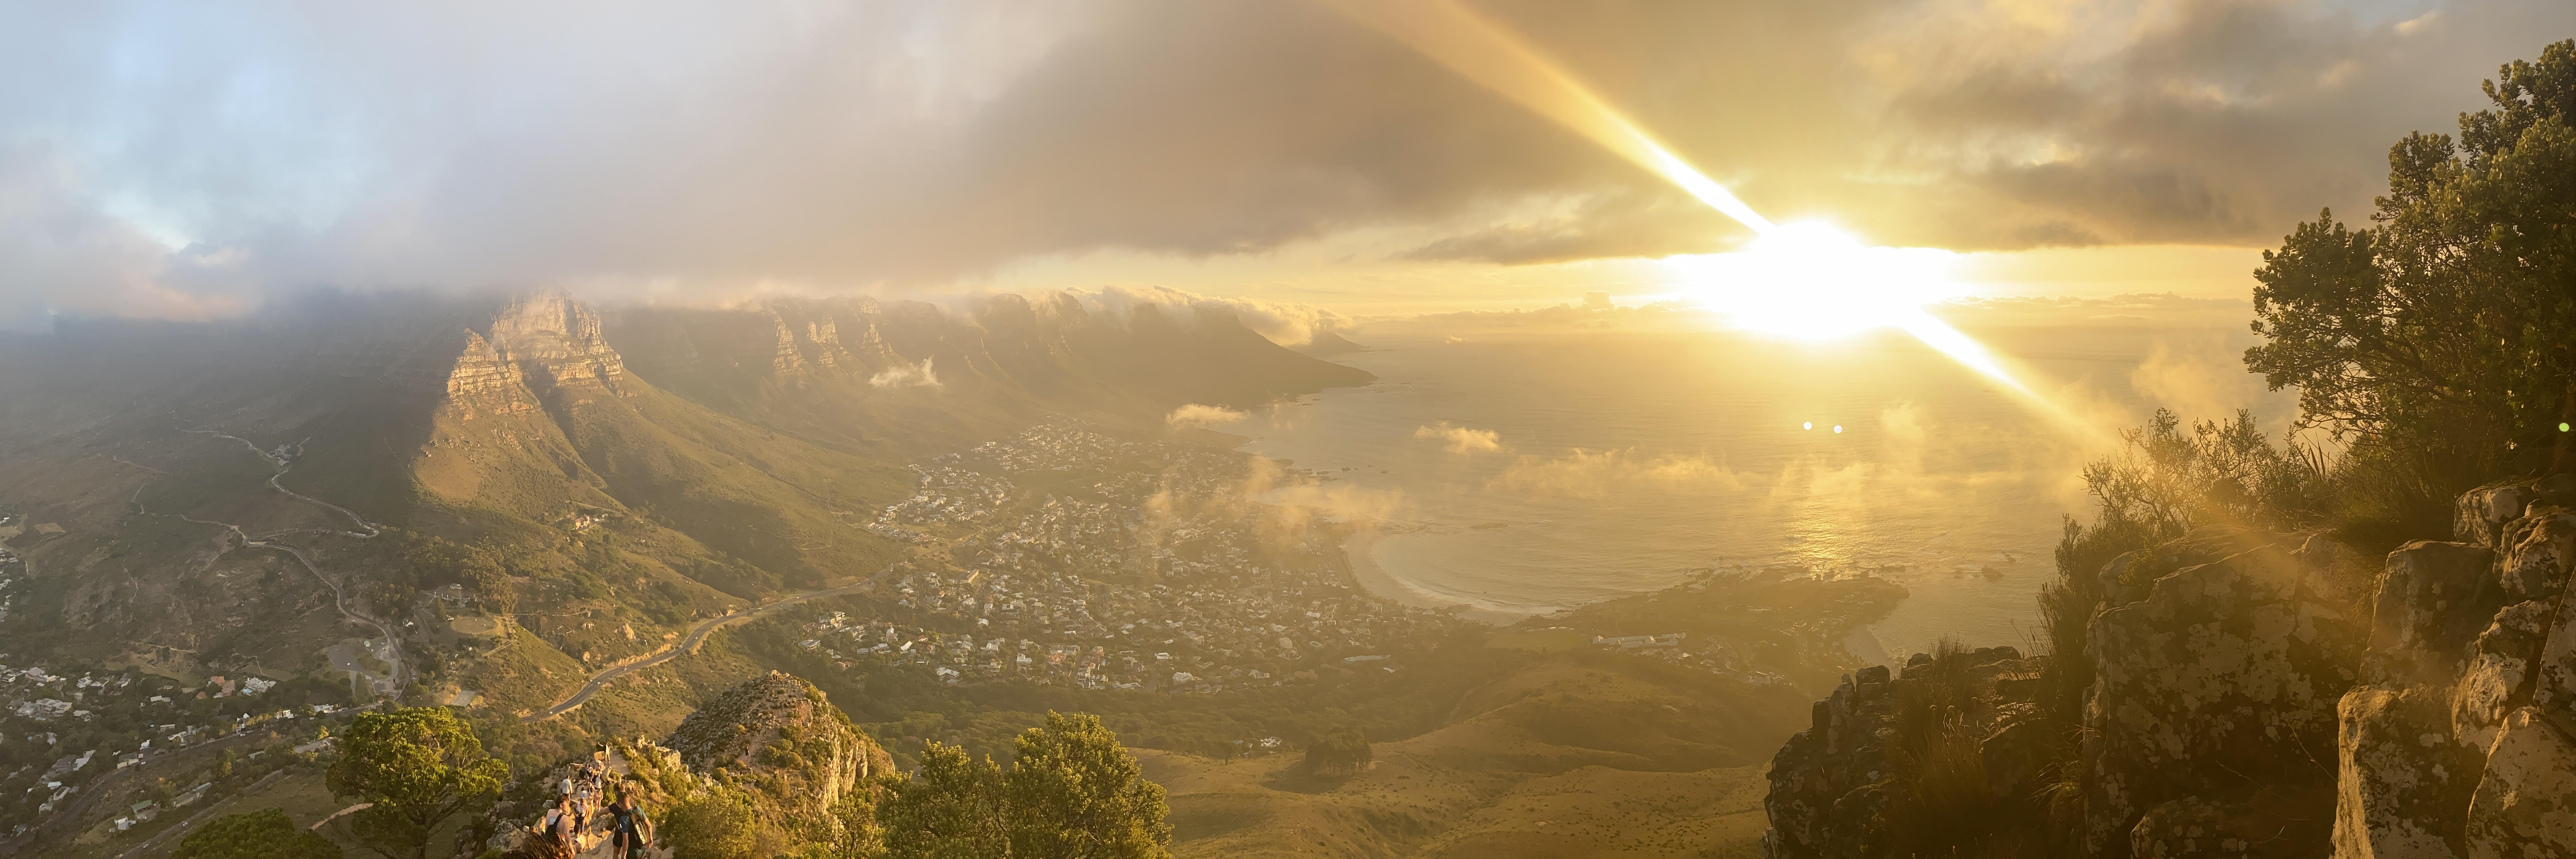 View of Cape Town, South Africa from the summit of a hike